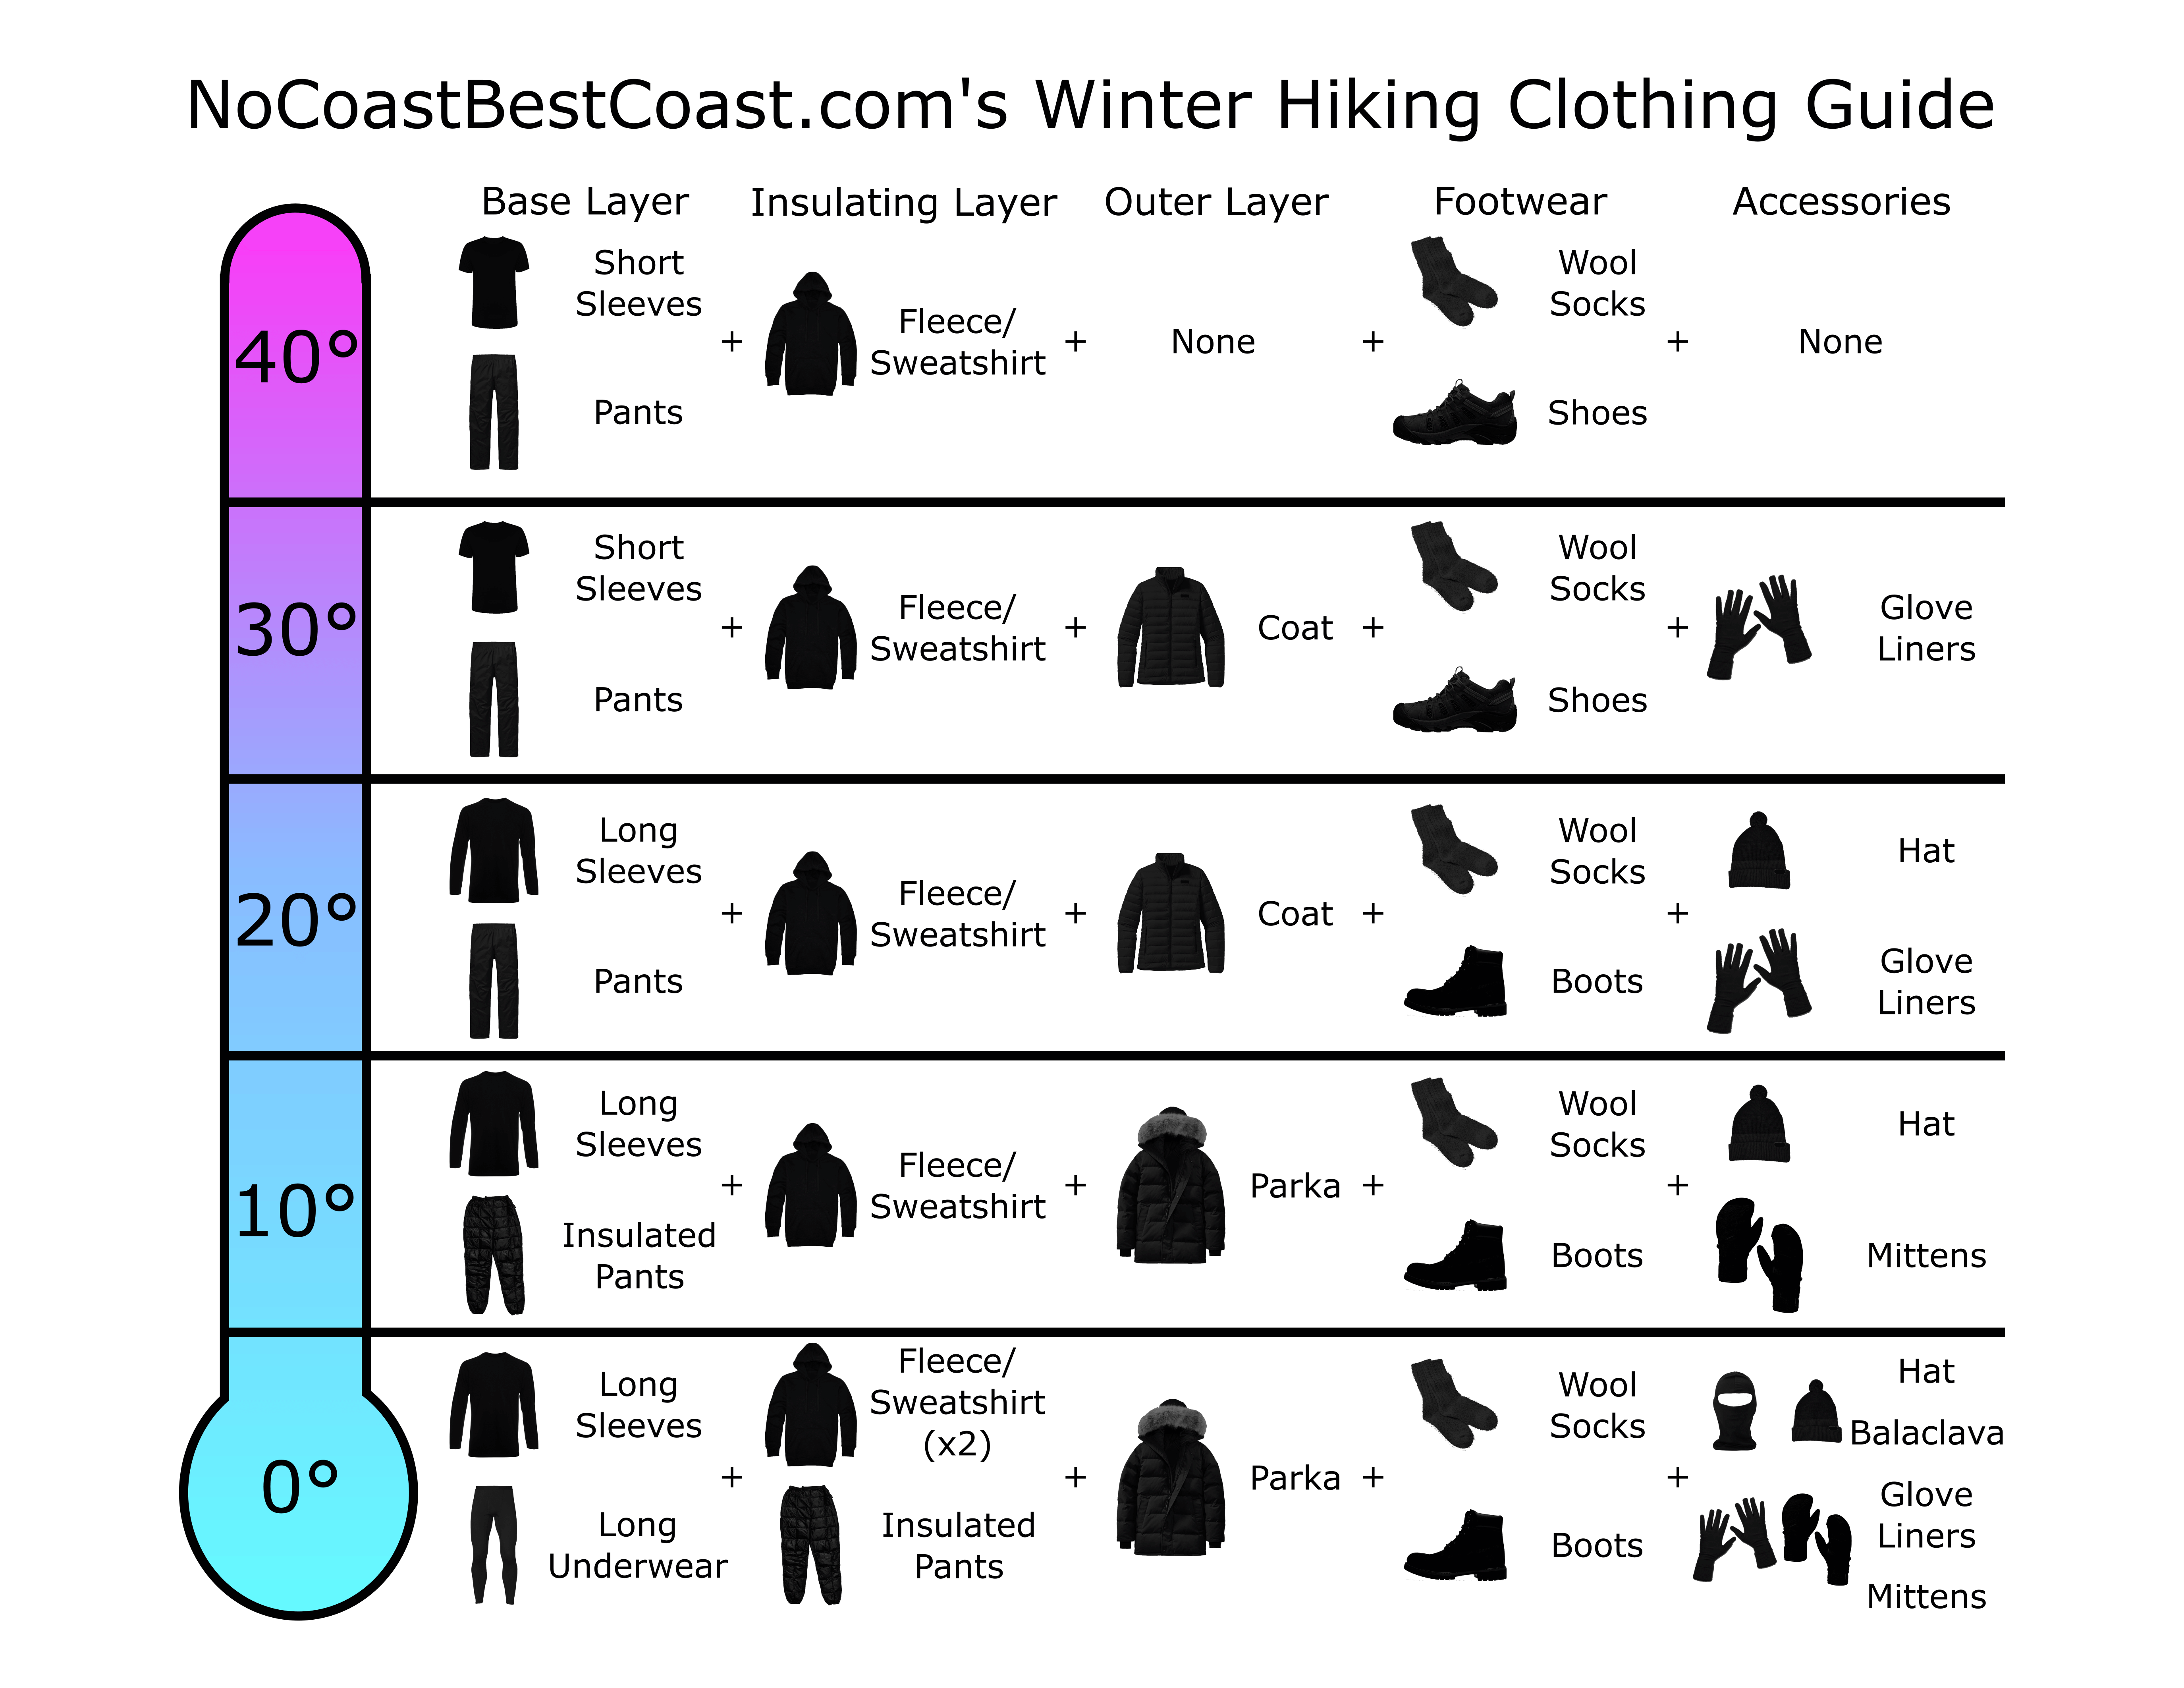 https://www.nocoastbestcoast.com/images/winter-clothing-guide.png